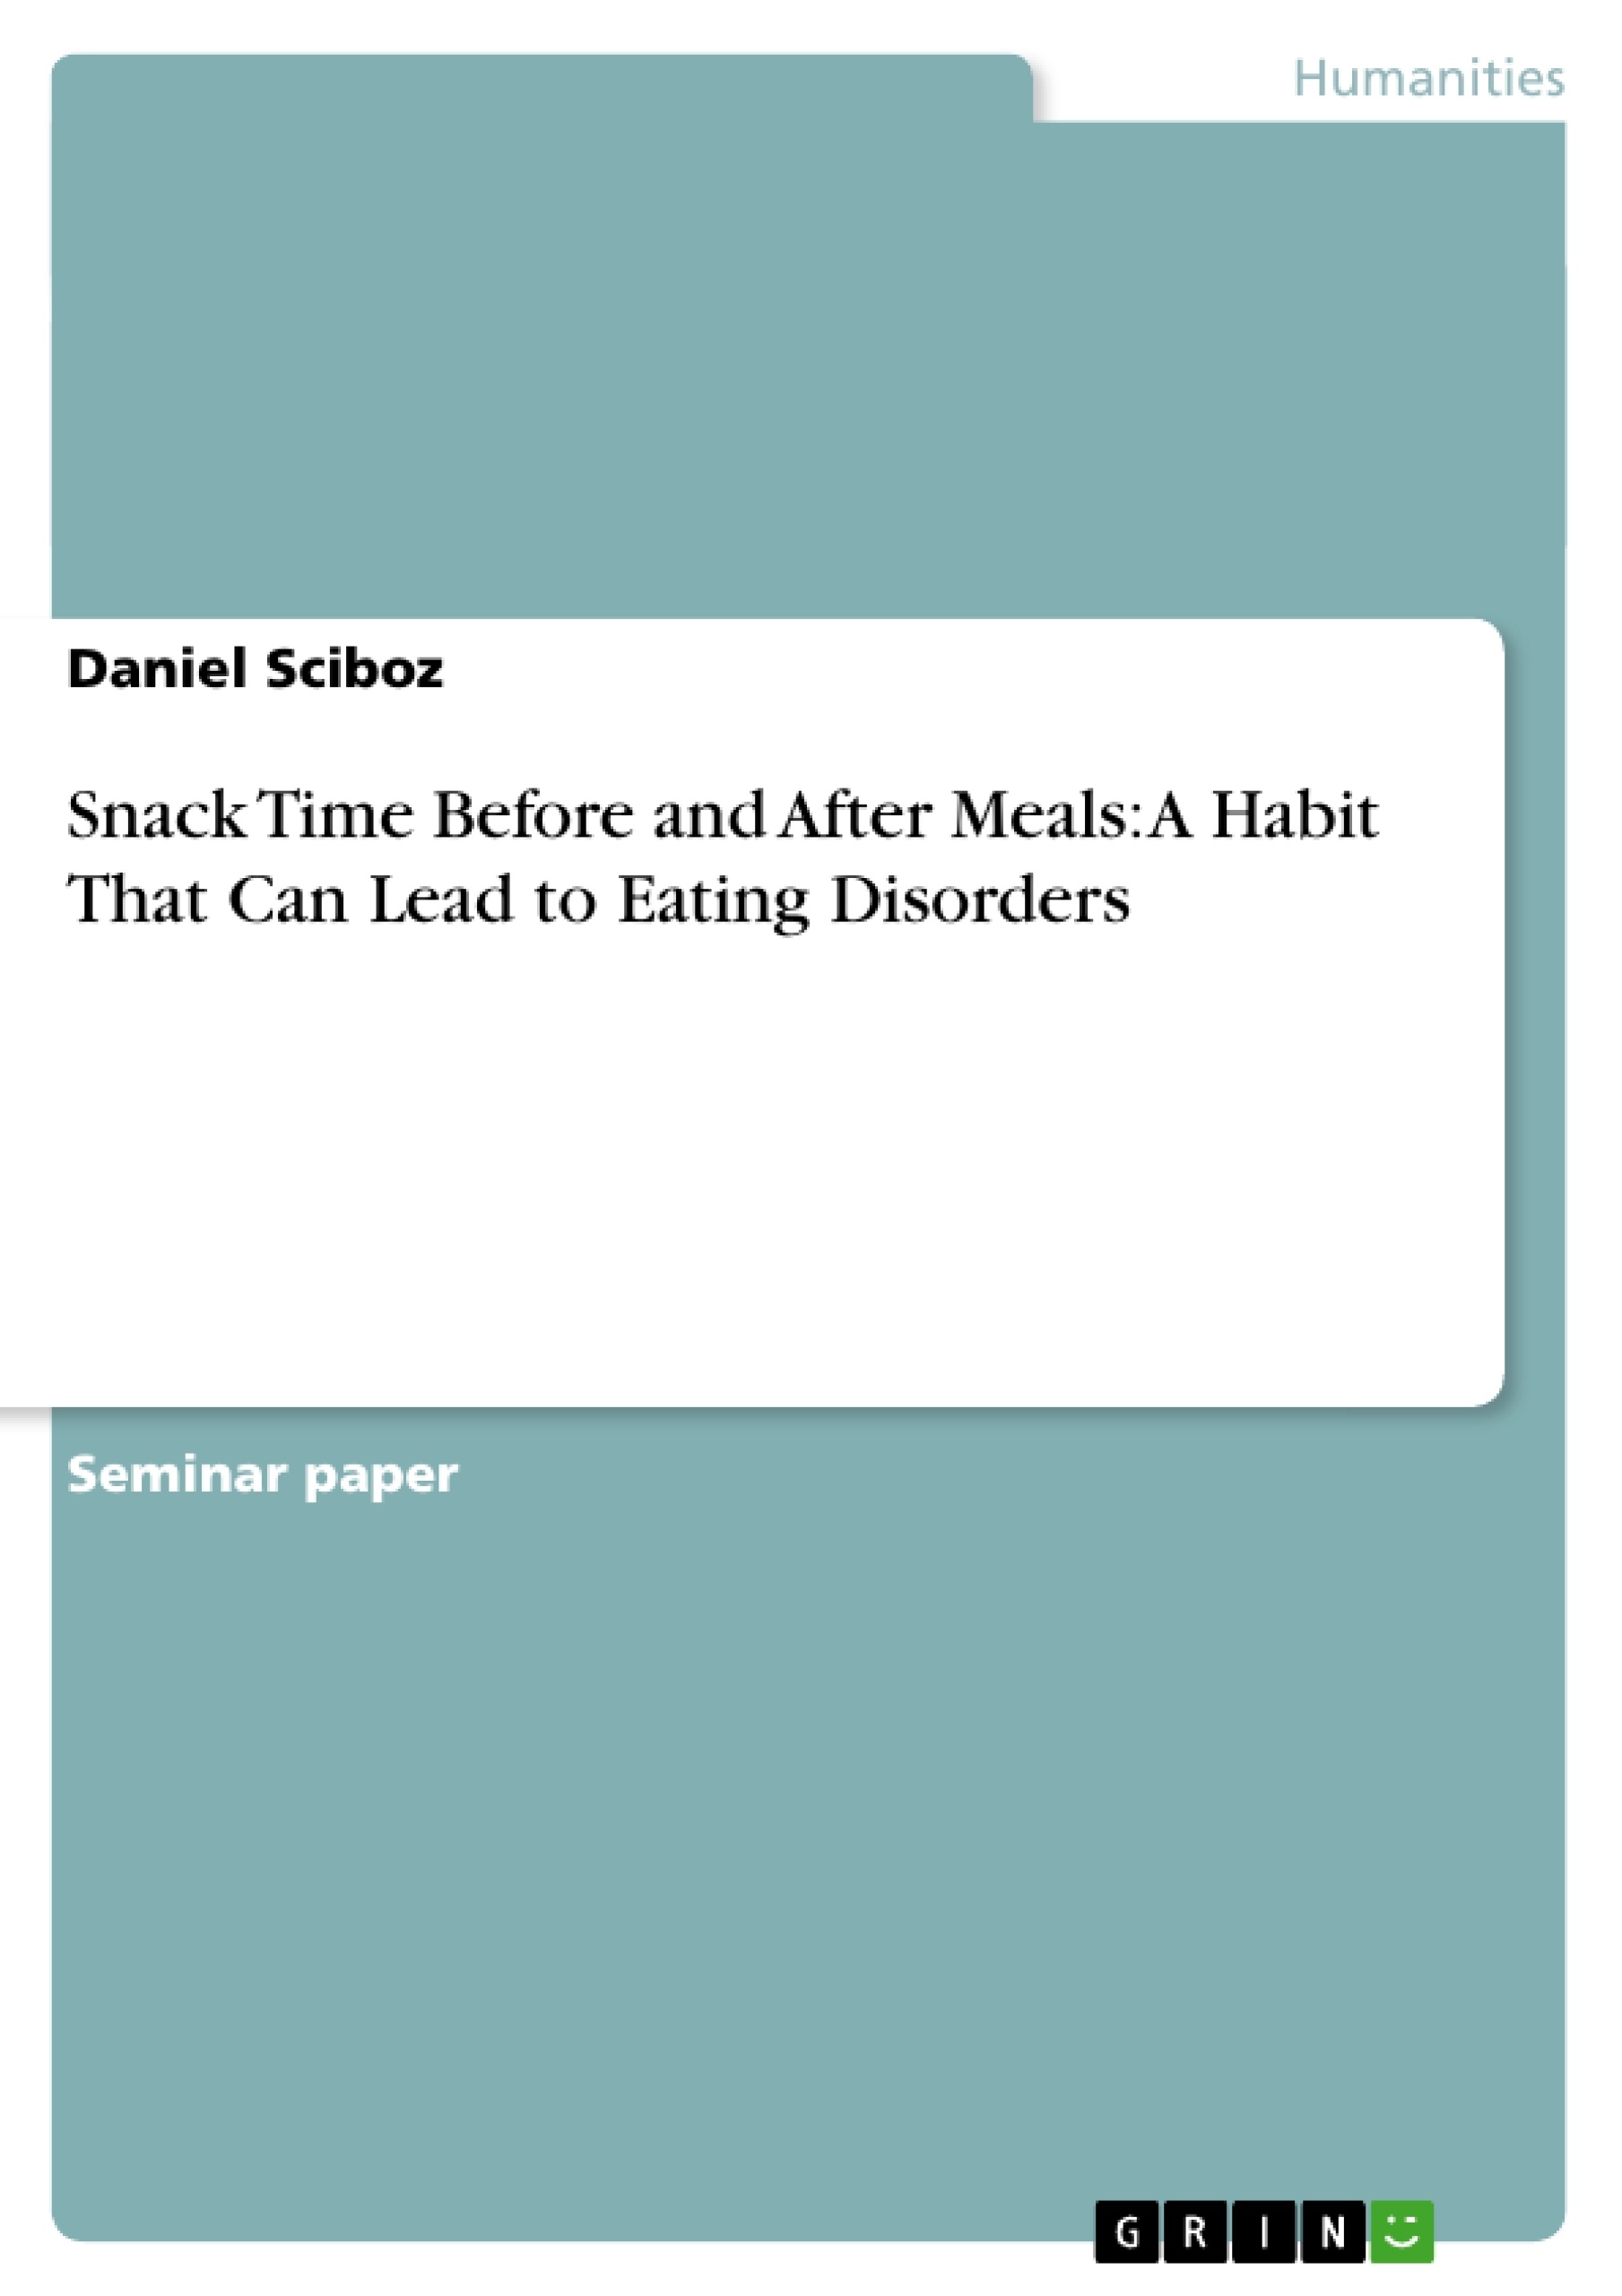 Título: Snack Time Before and After Meals: A Habit That Can Lead to Eating Disorders